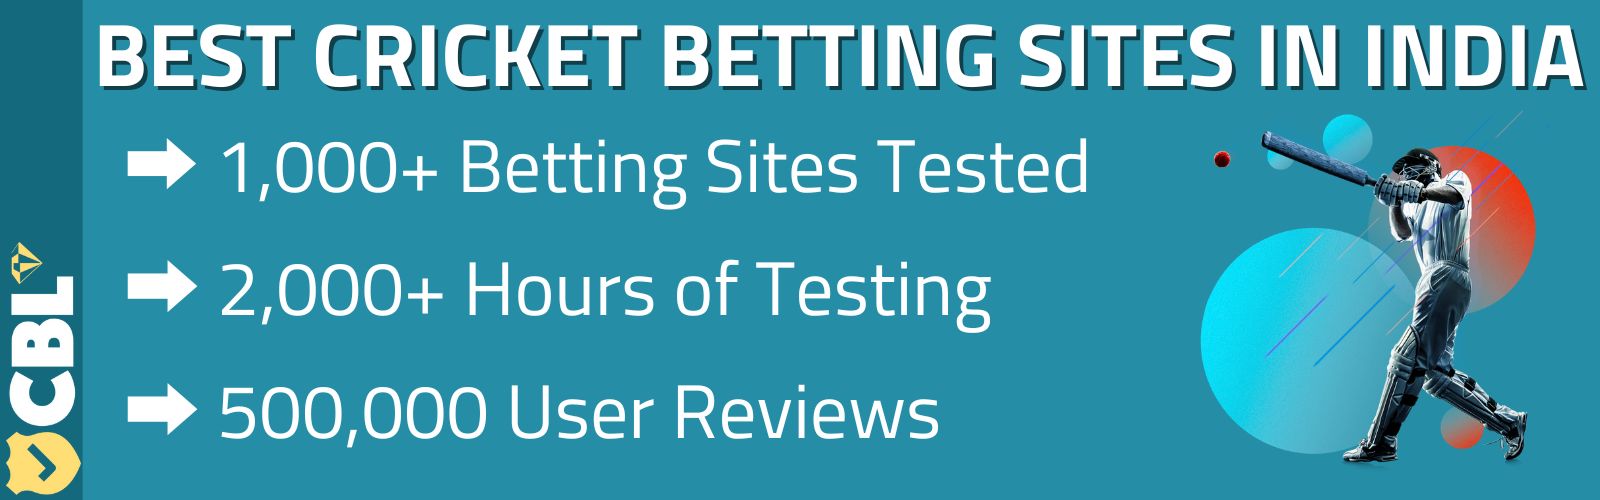 9 Ways Best Cricket Betting App In India Can Make You Invincible